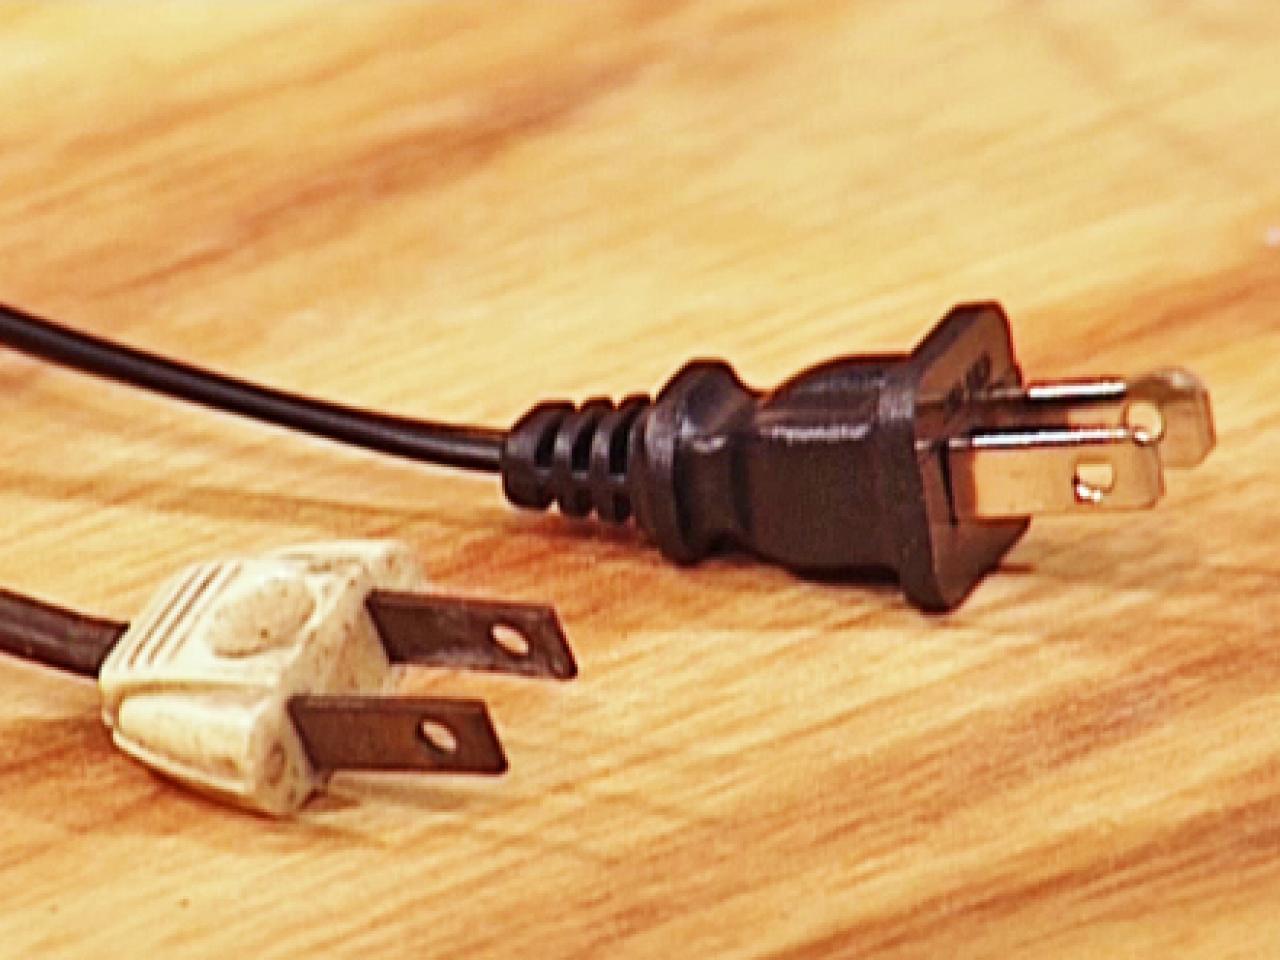 How To Install A Lamp Cord Switch, How To Install Lamp Cord Switch